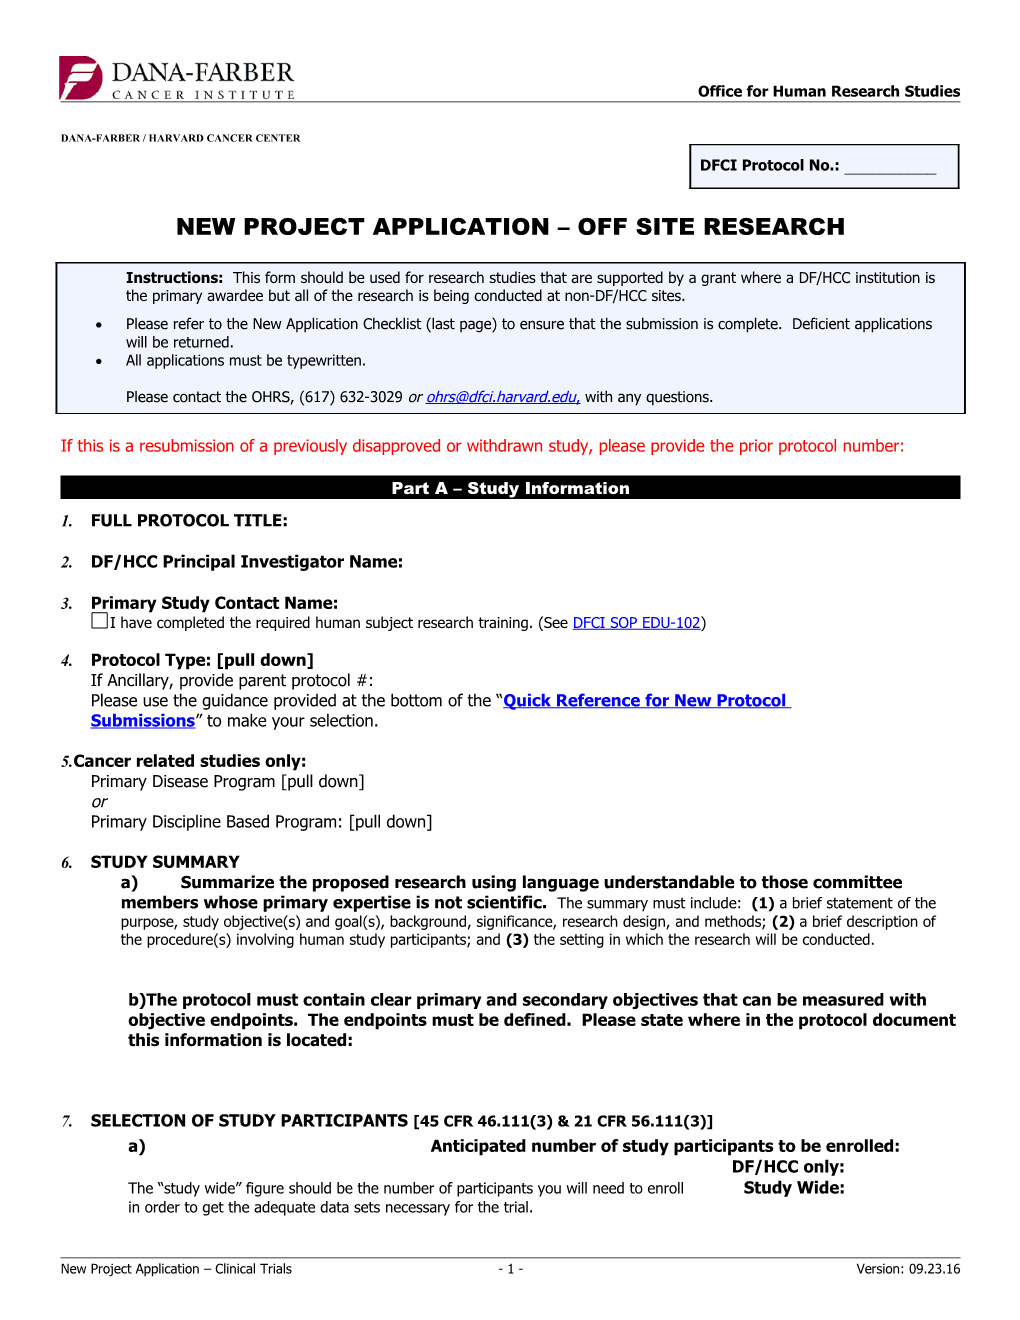 New Project Application - Clinical Trials